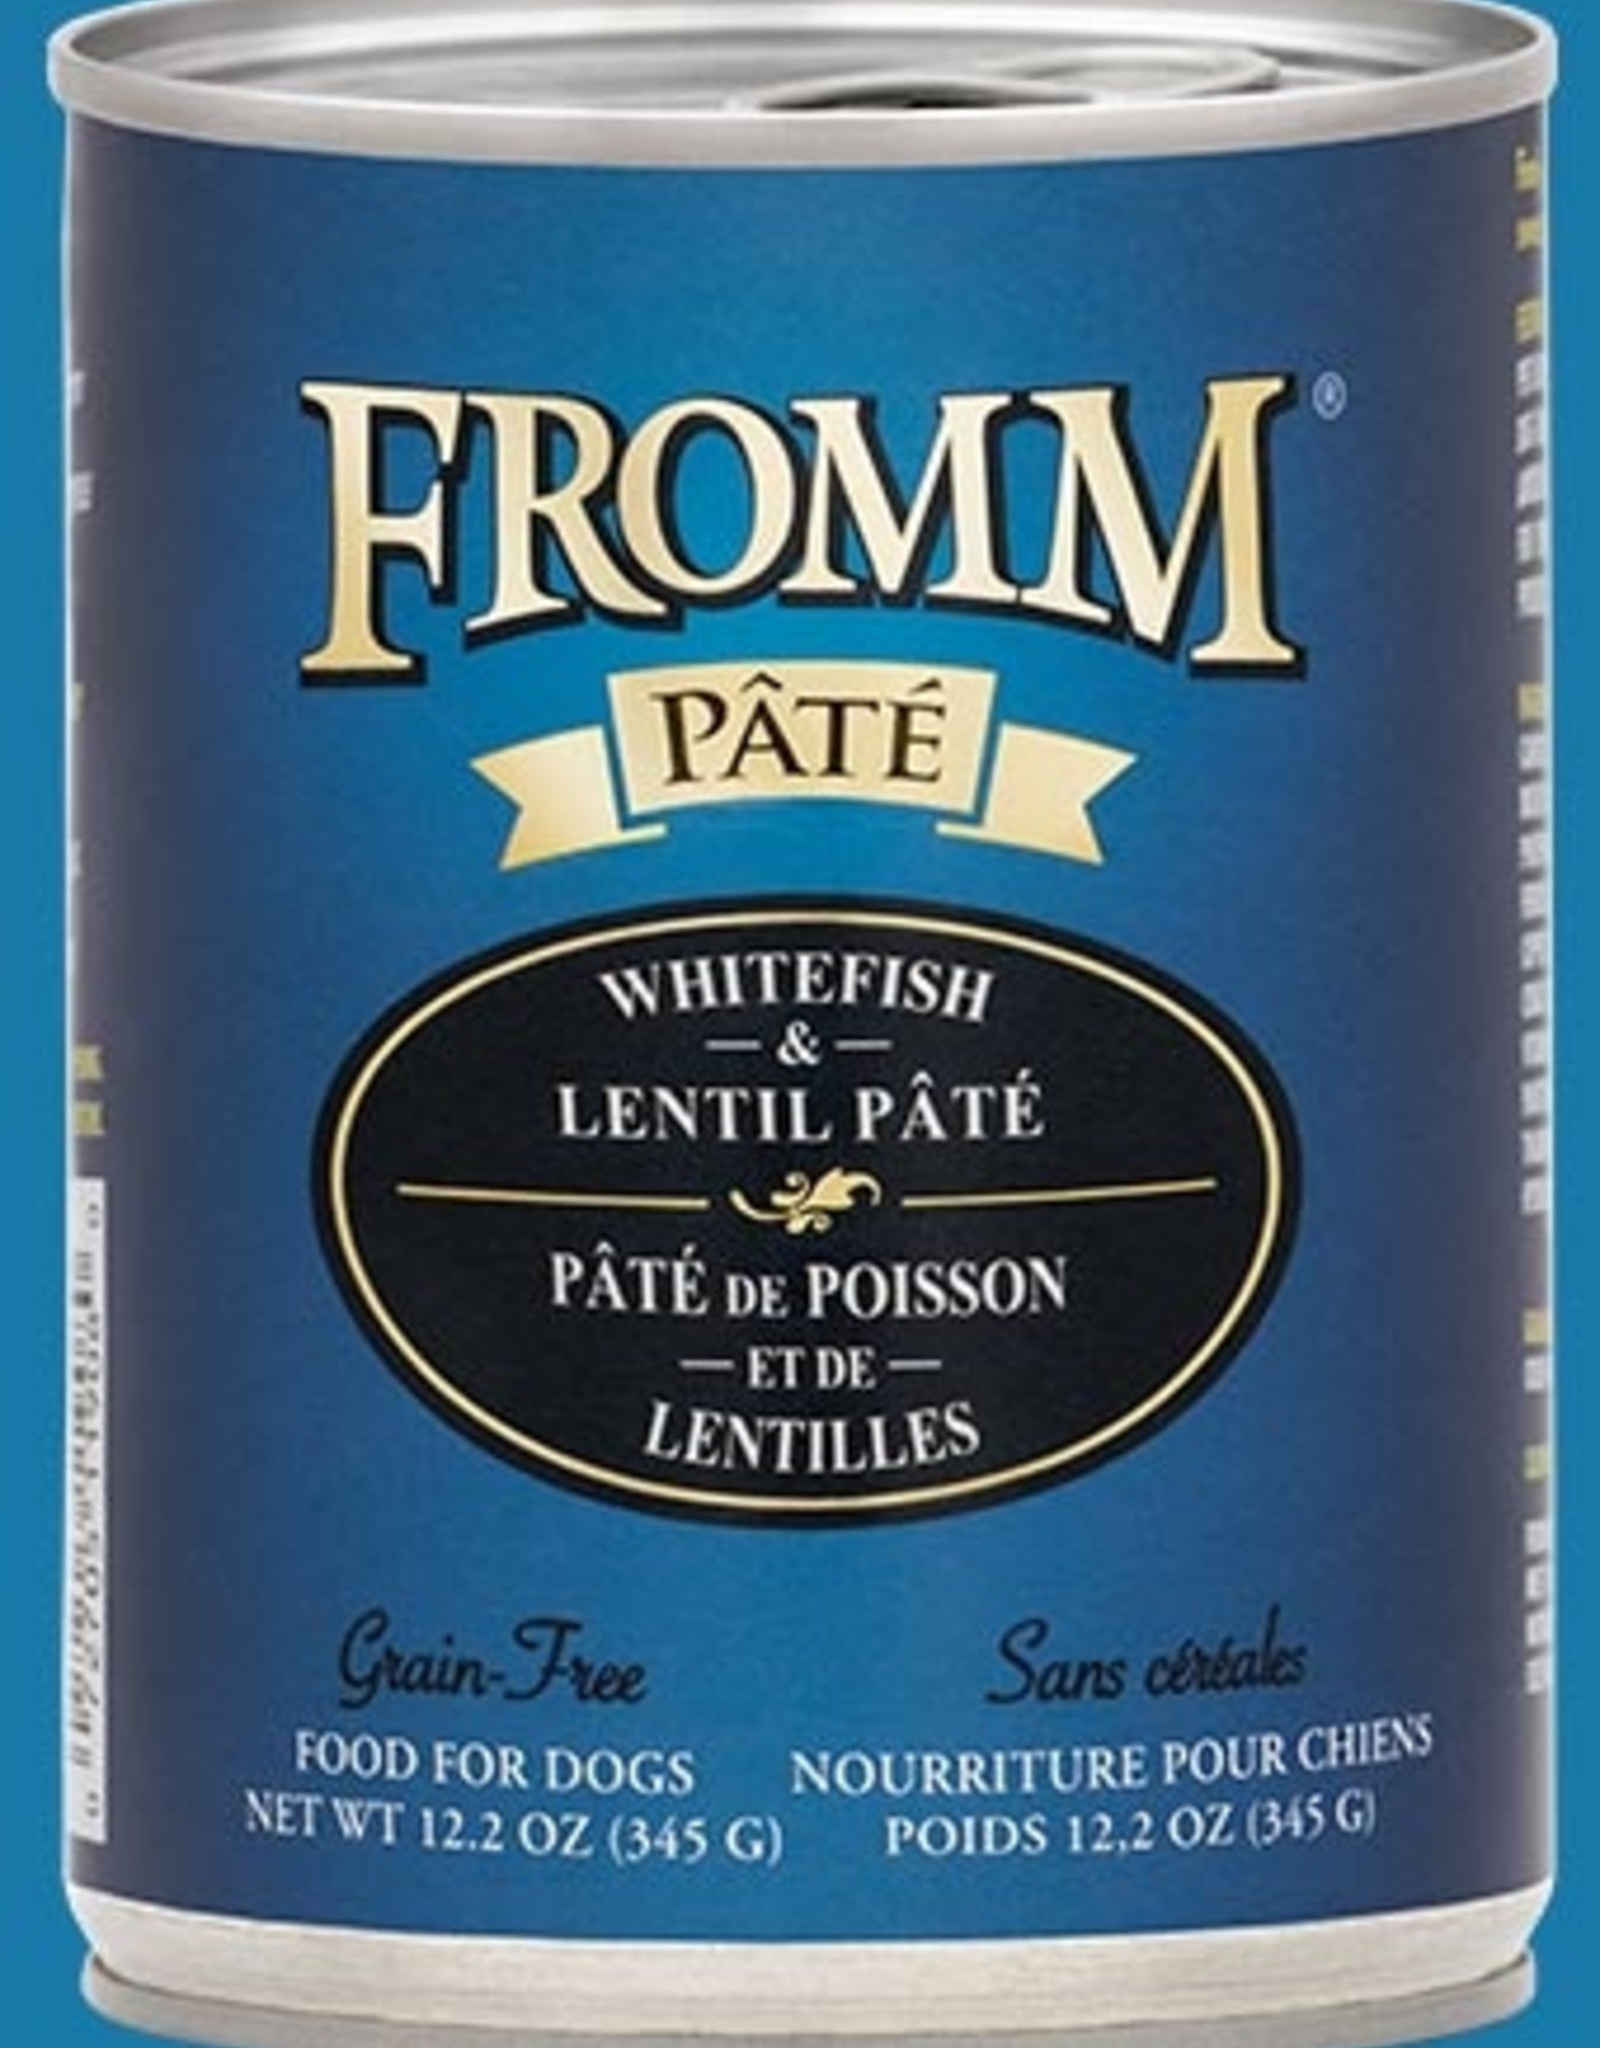 FROMM FAMILY FOODS LLC FROMM DOG PATE WHITEFISH CAN 12.2OZ CASE OF 12